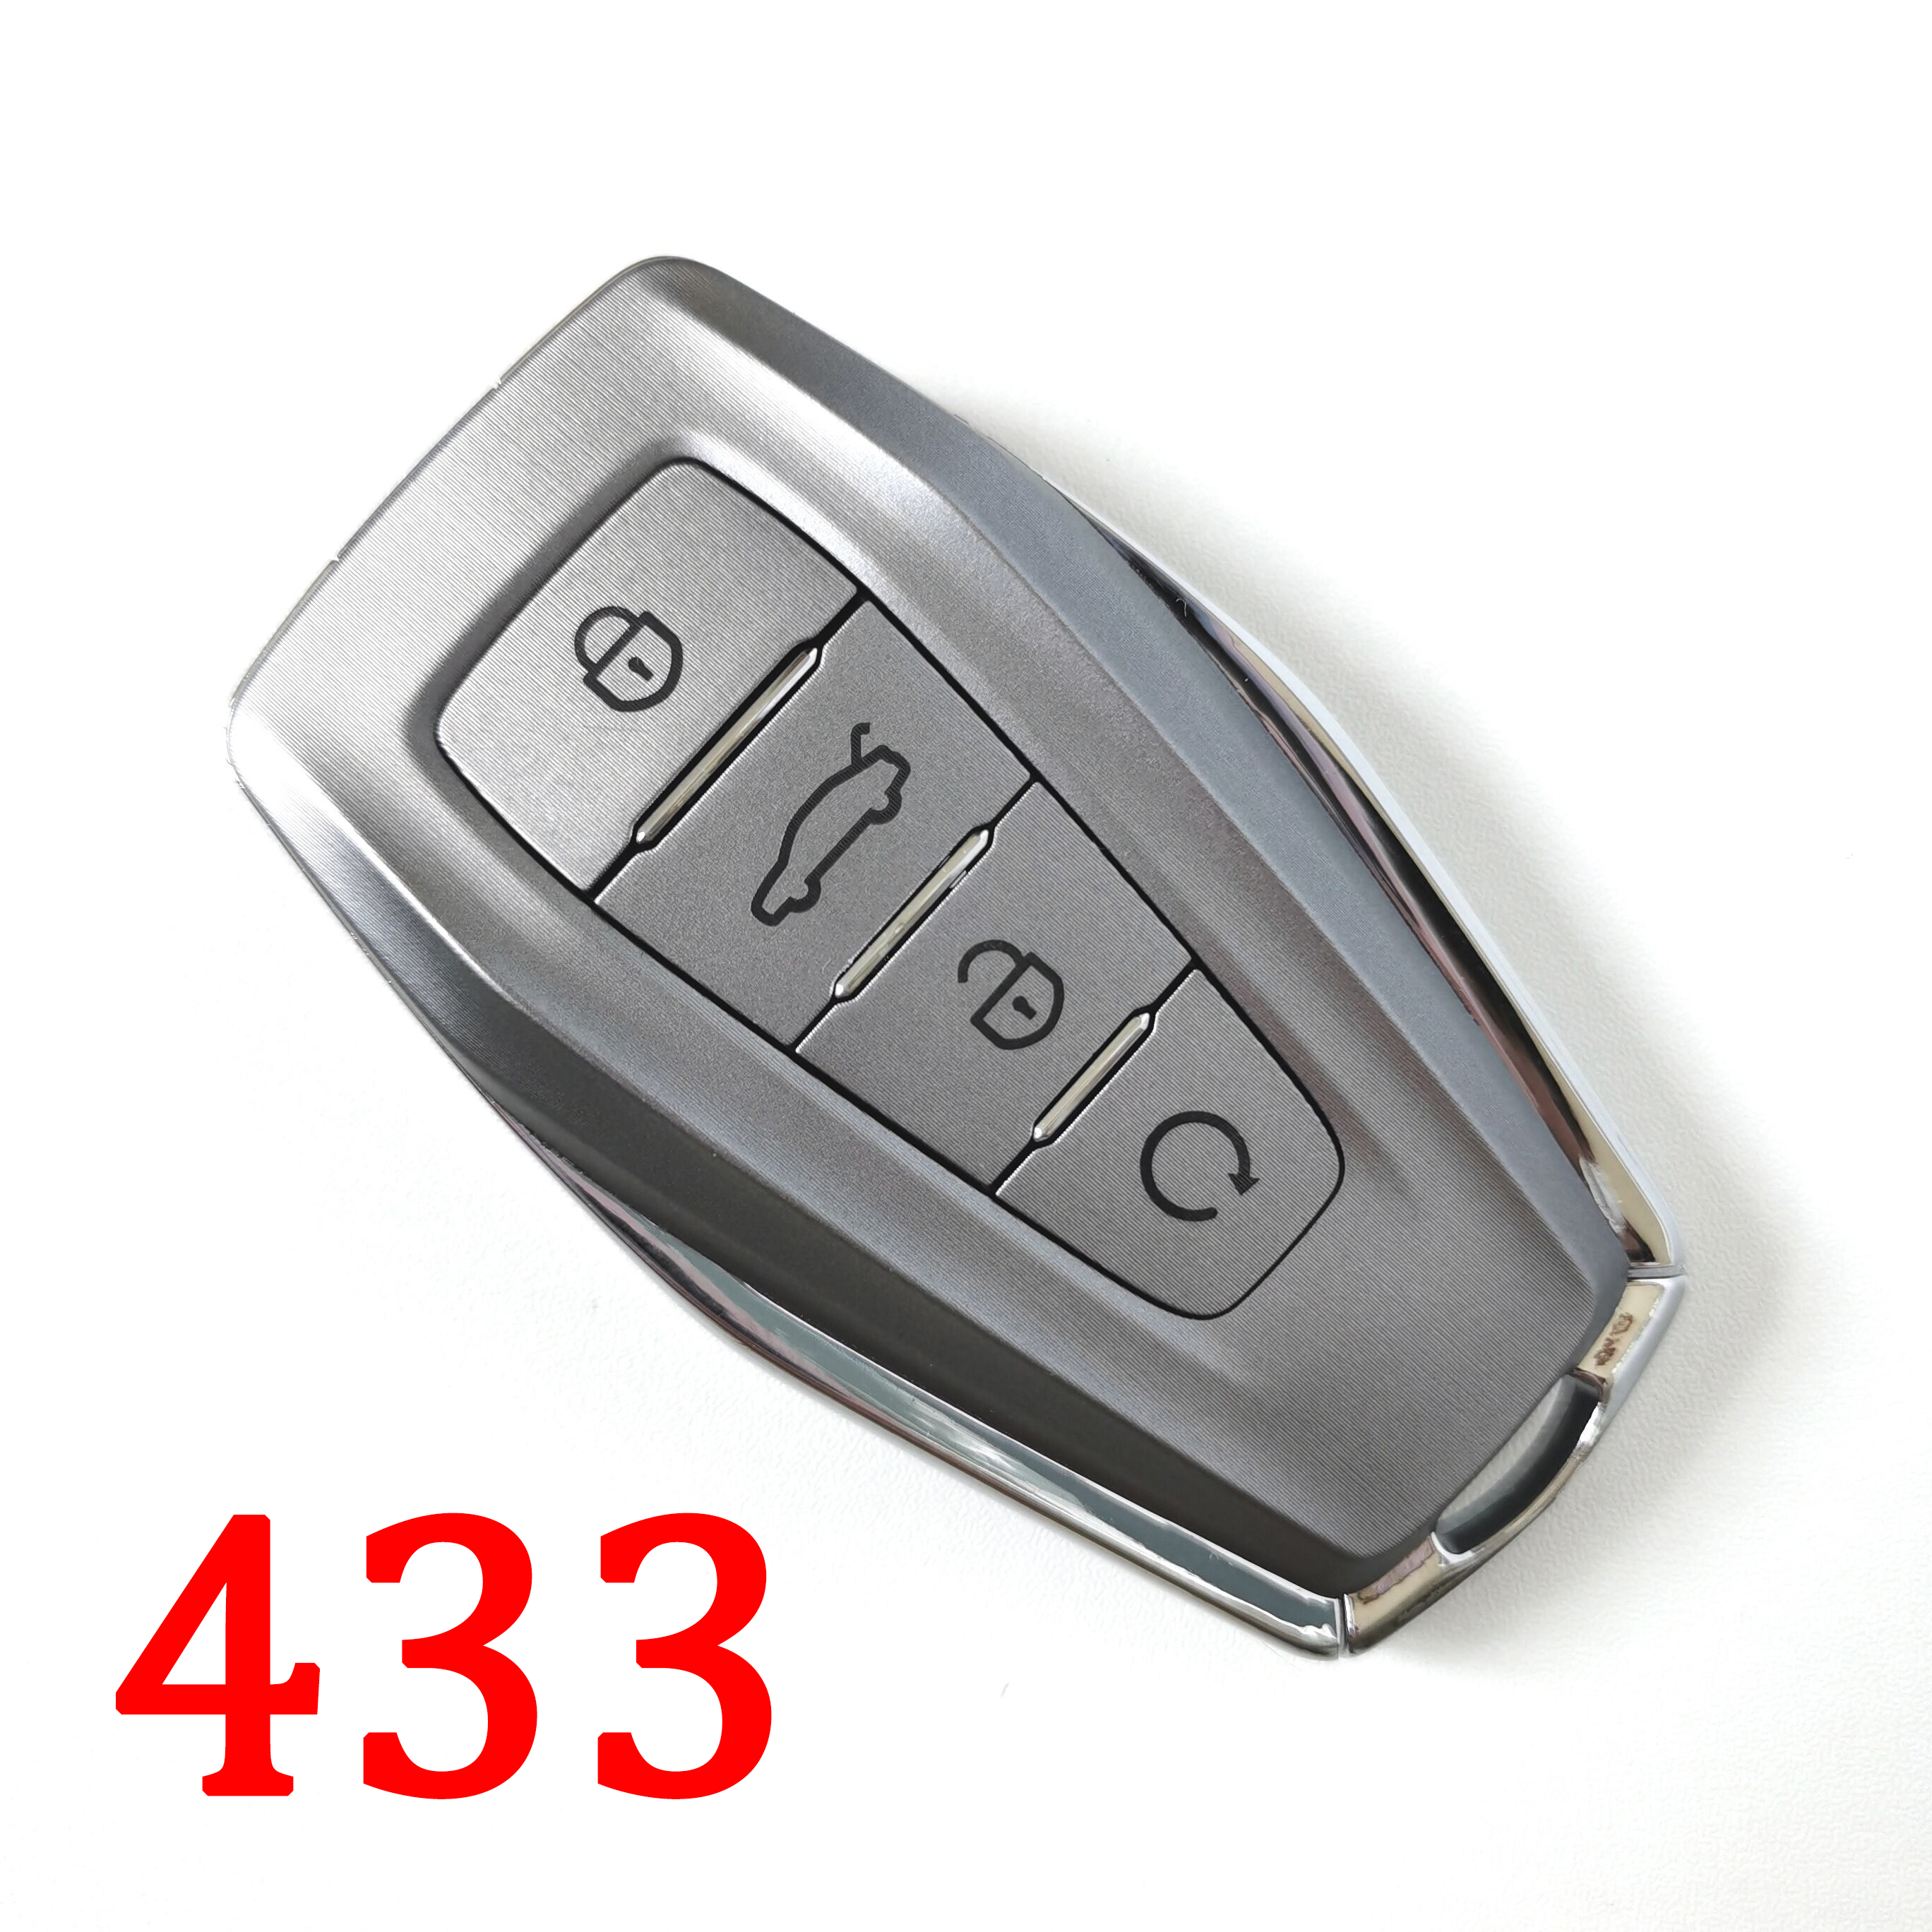 Original 4 Buttons 433 MHz Smart Key for Geely - ID 47